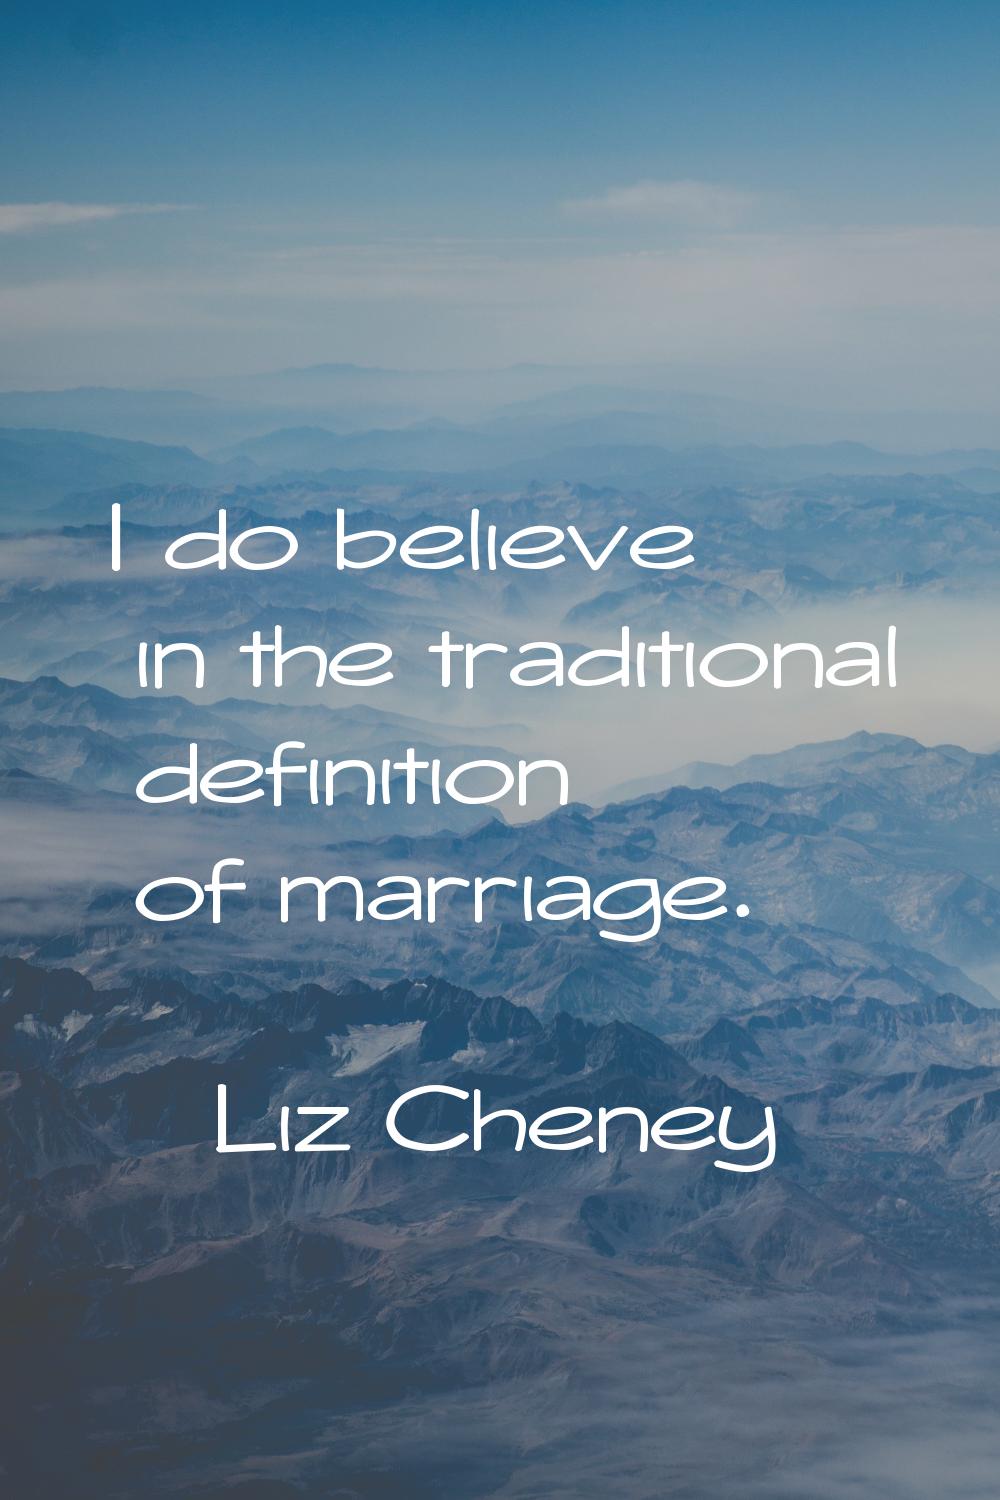 I do believe in the traditional definition of marriage.